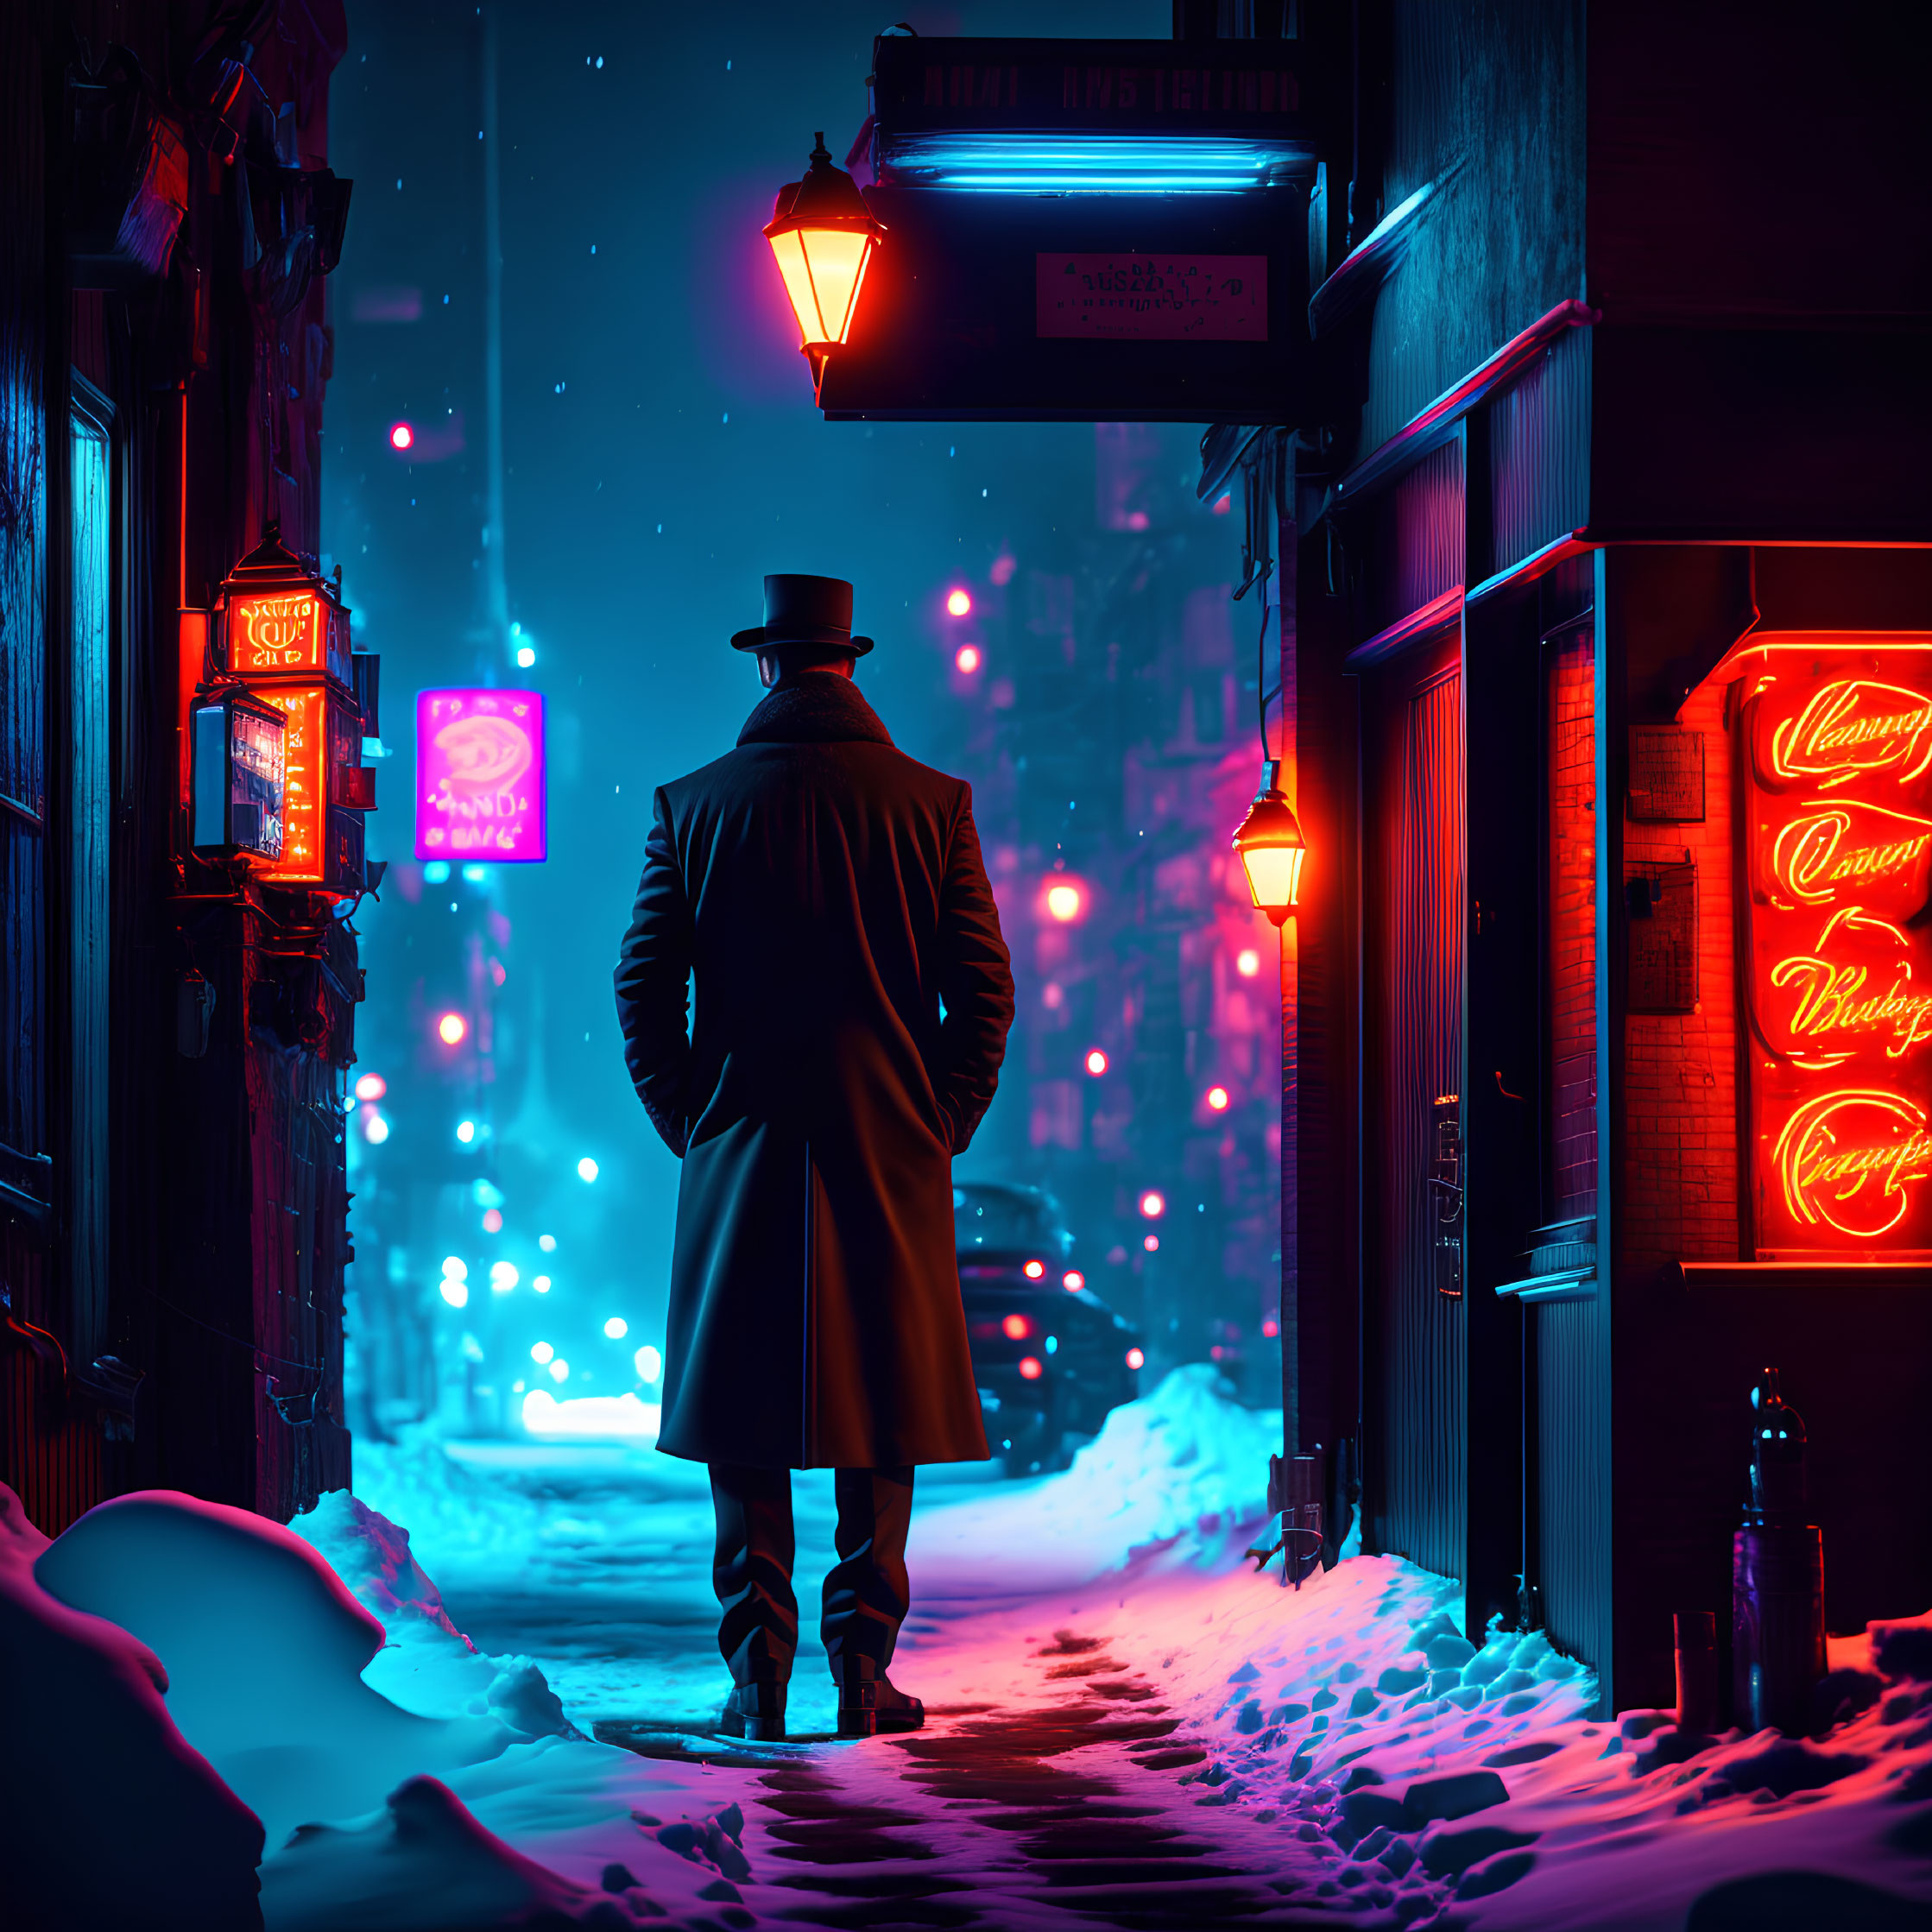 Person in coat and hat walking in snowy, neon-lit alley at night